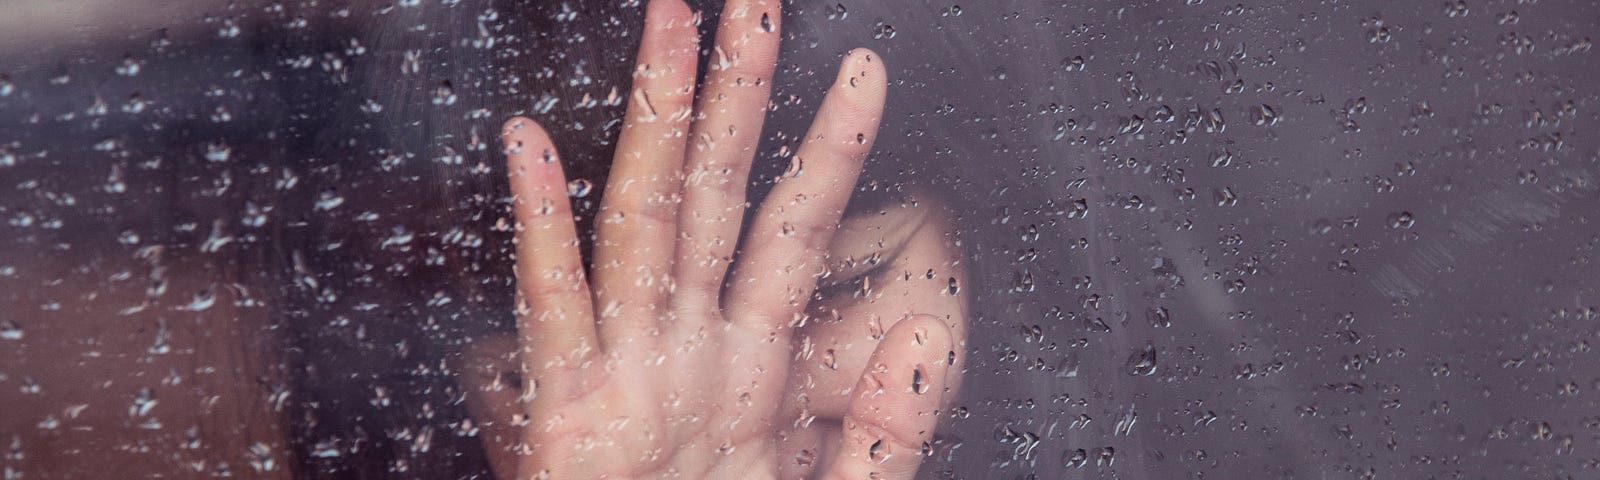 Distraught woman with hand covering part of her face pressed to a rainy window.